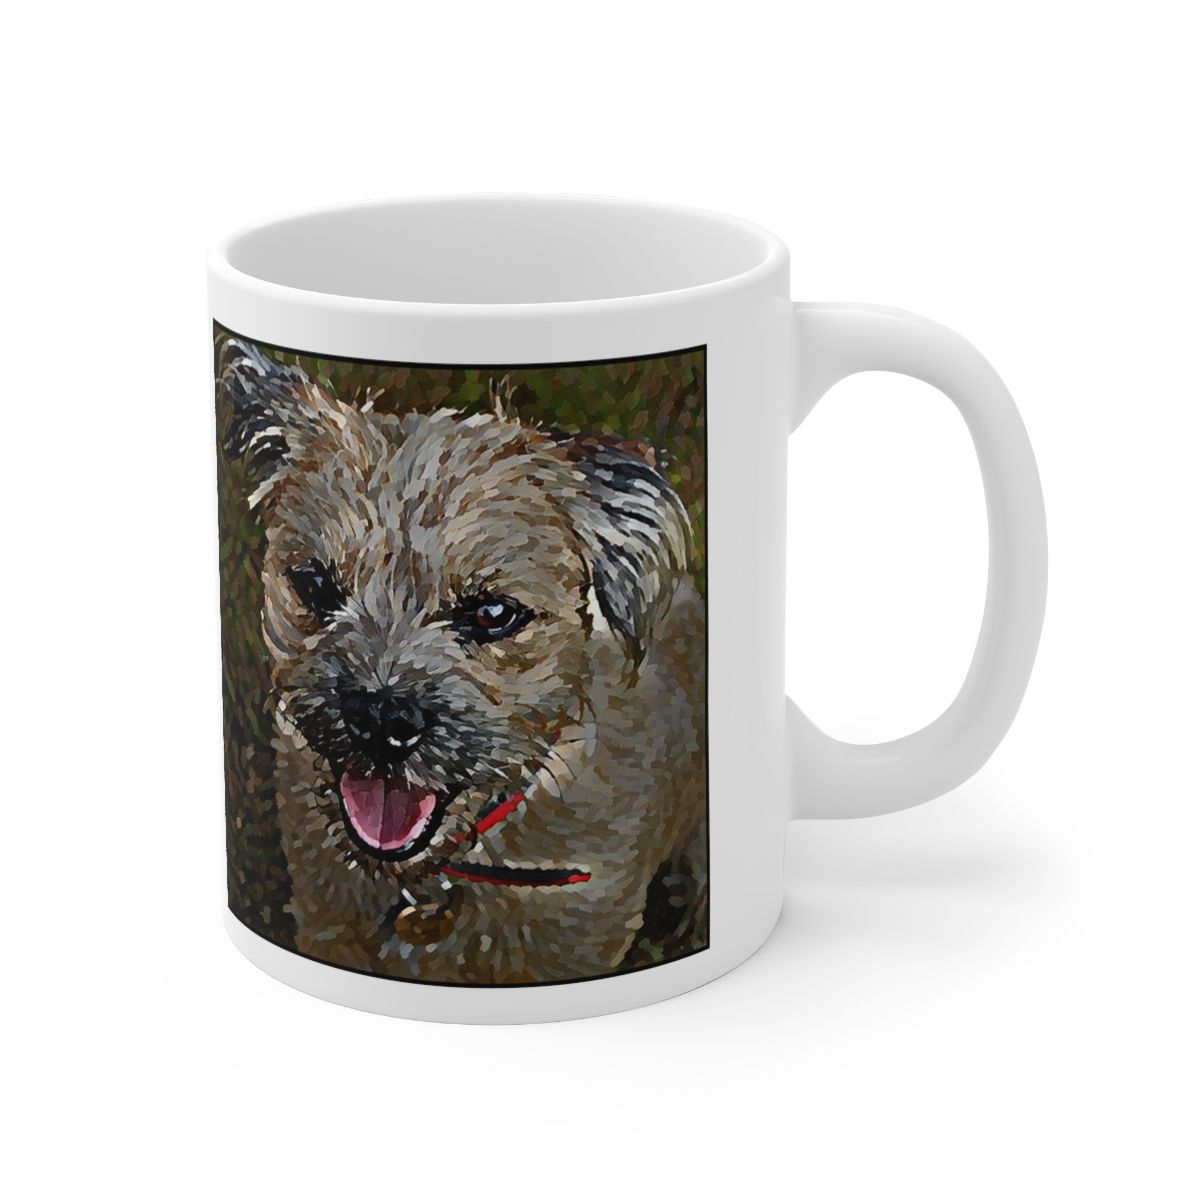 Picture of Border Terrier-Lord Lil Bit Mug